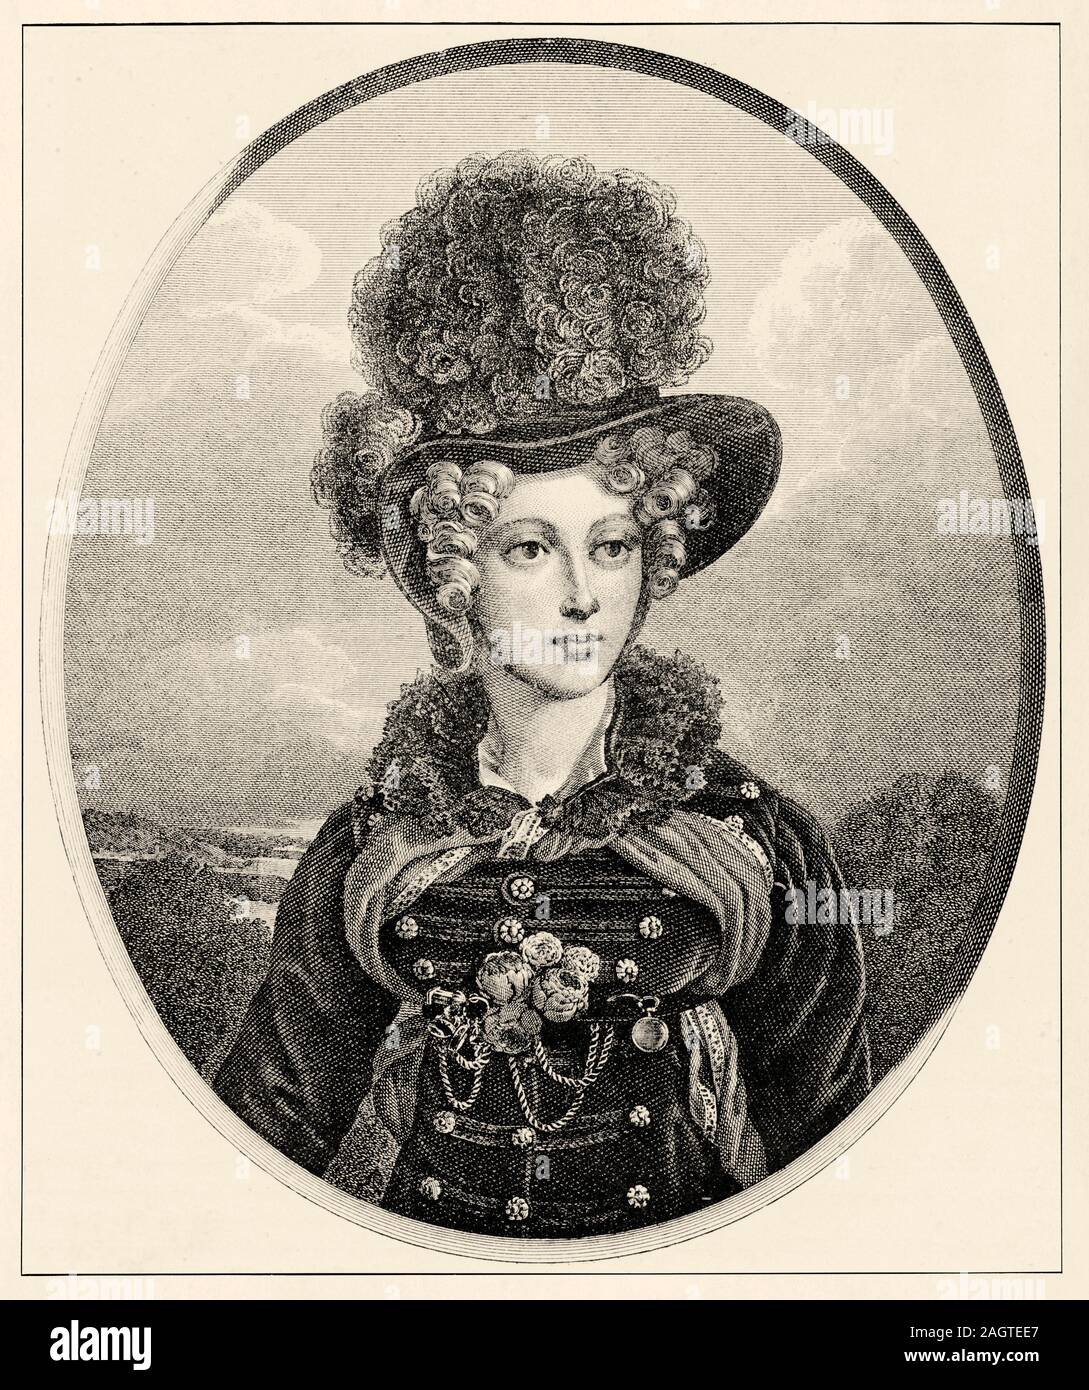 Portrait of Maria Carolina of Naples and Sicily, Duchess of Berry (Caserta, November 5, 1798 - Brunnsee Castle, near Mureck, Styria, April 16, 1870) w Stock Photo